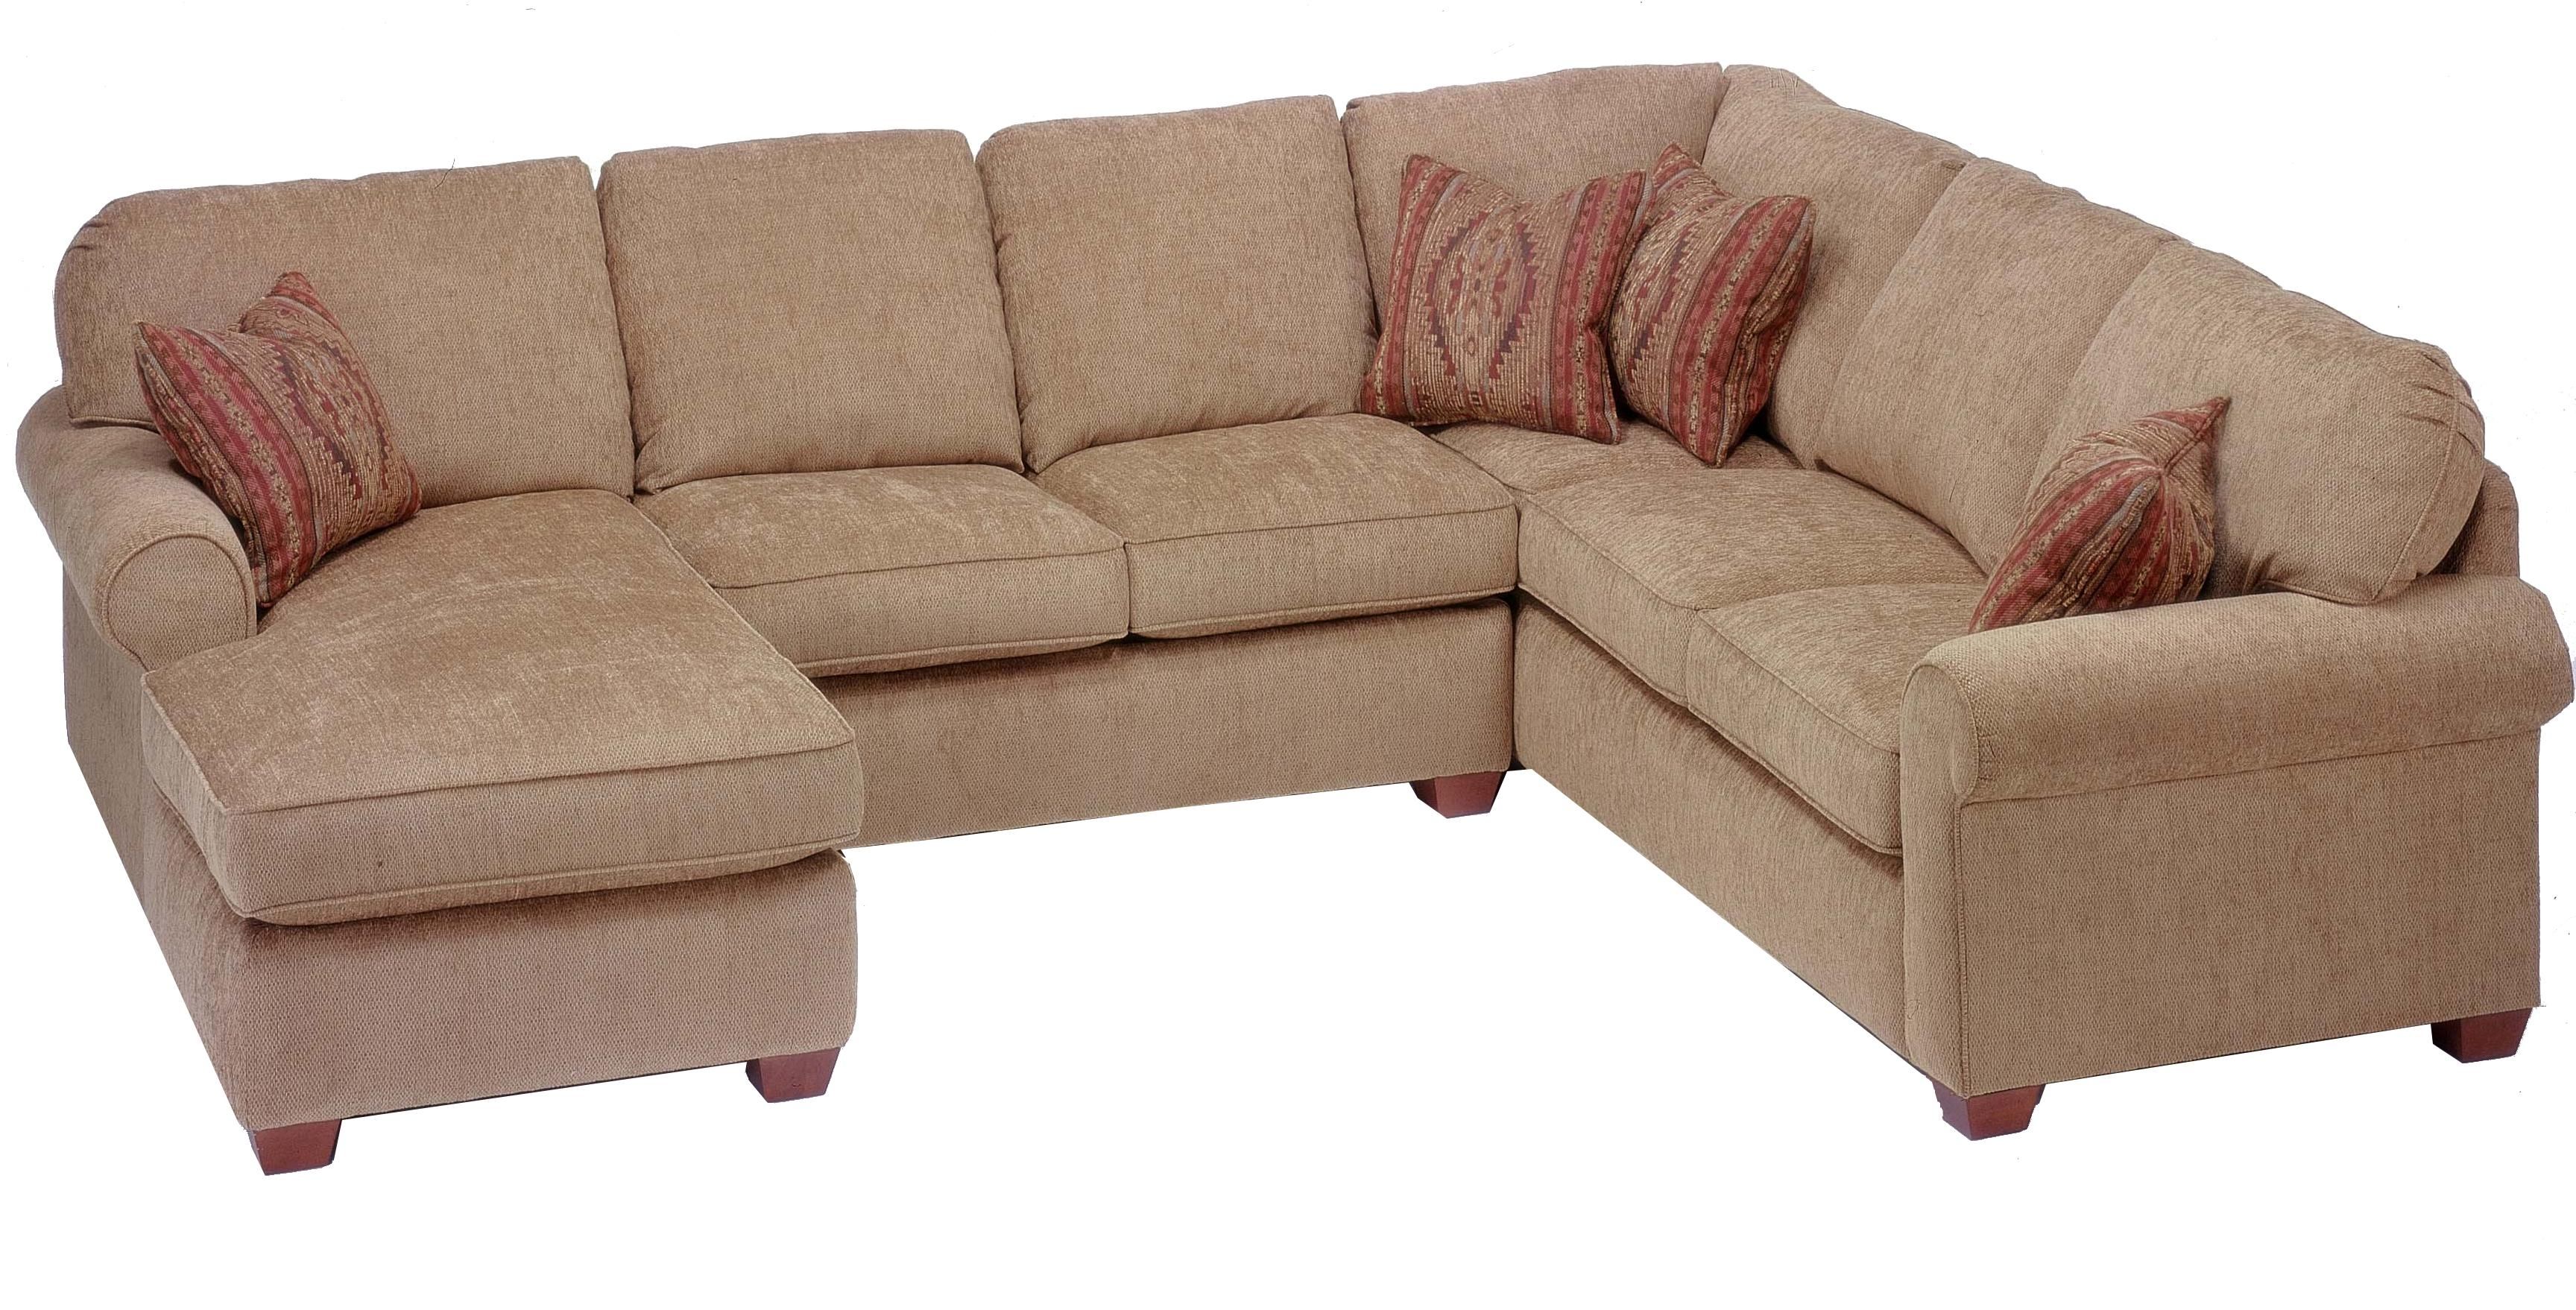 Flexsteel Thornton 3 Piece Sectional With Chaise – Ahfa – Sofa With Regard To Meyer 3 Piece Sectionals With Raf Chaise (View 10 of 30)